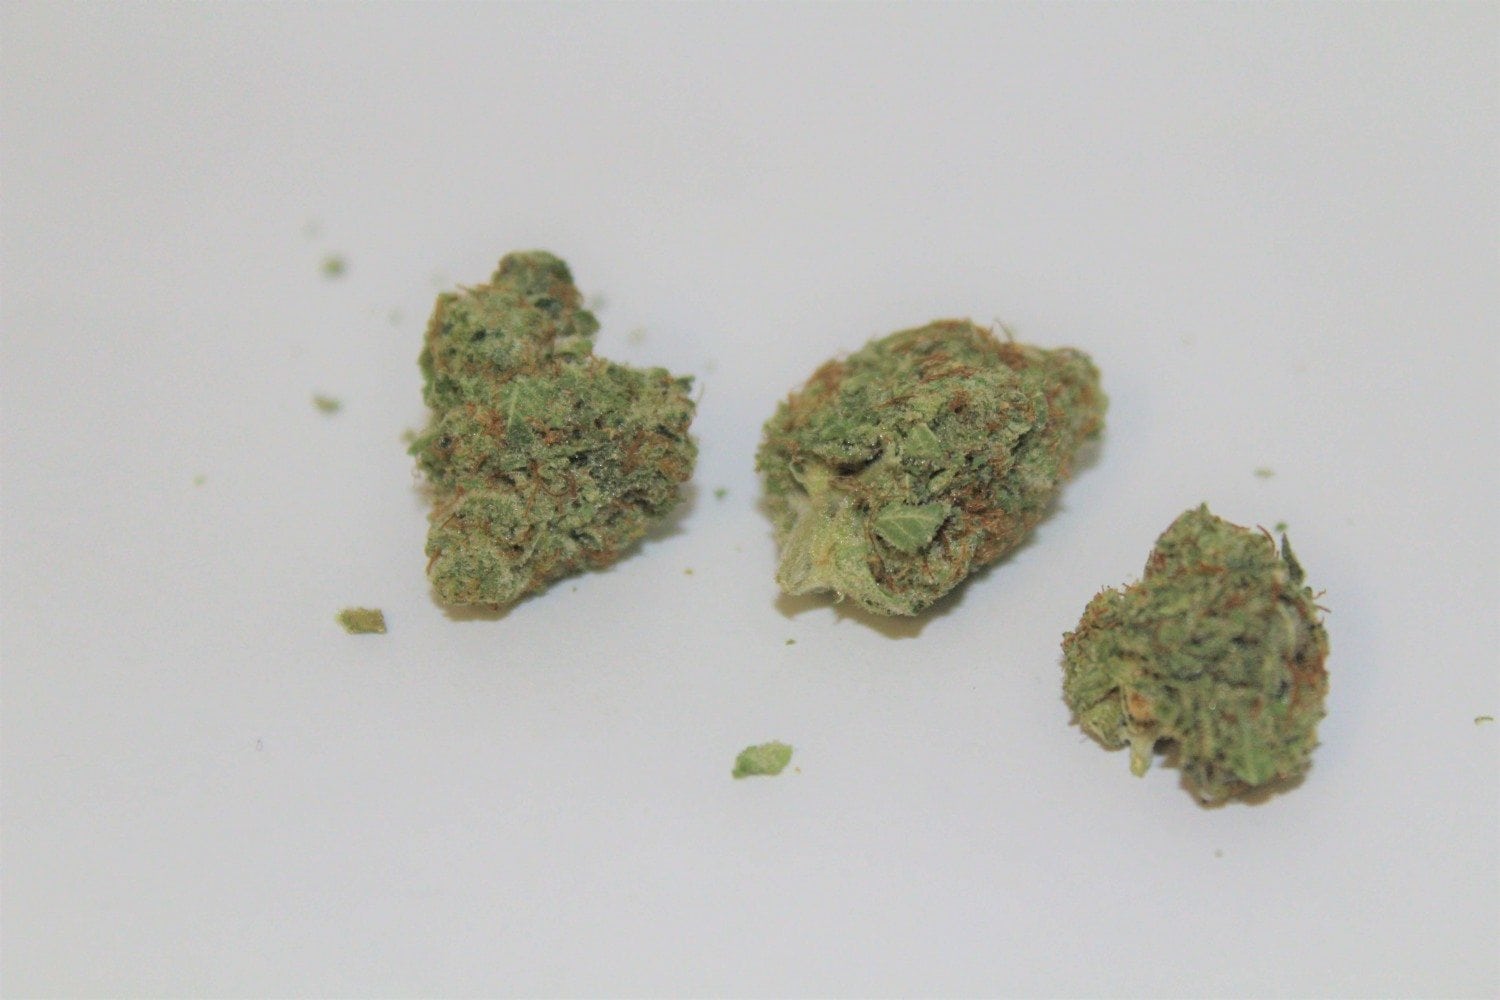 Find Out What Makes The Kush Master strain So Dank